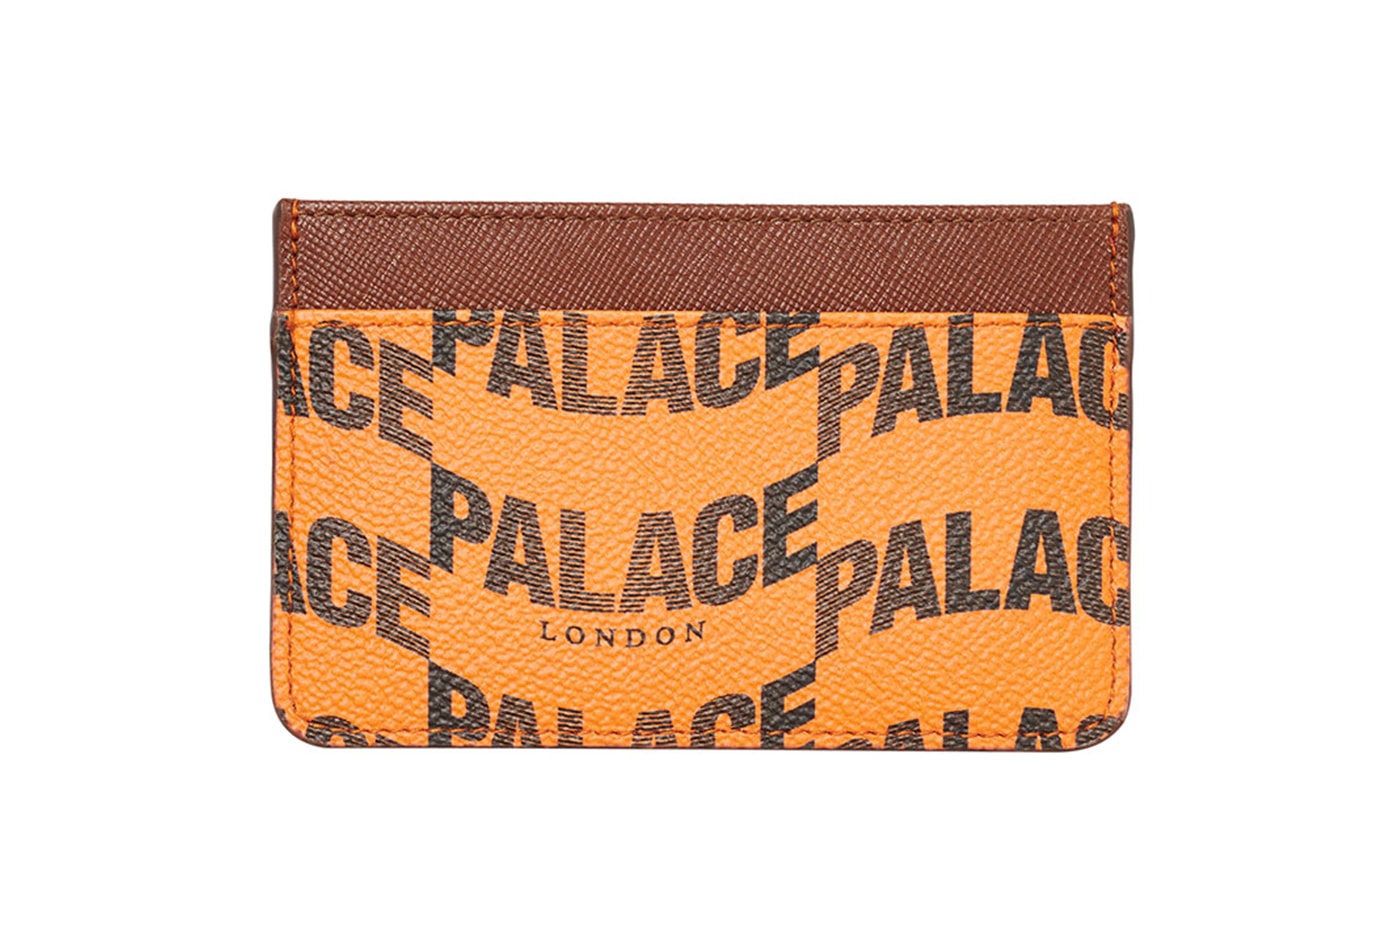 Palace Summer 2020 Accessories jamal smith london skull tri-ferg palace london skateboarding necklaces snakes stickers card holders 